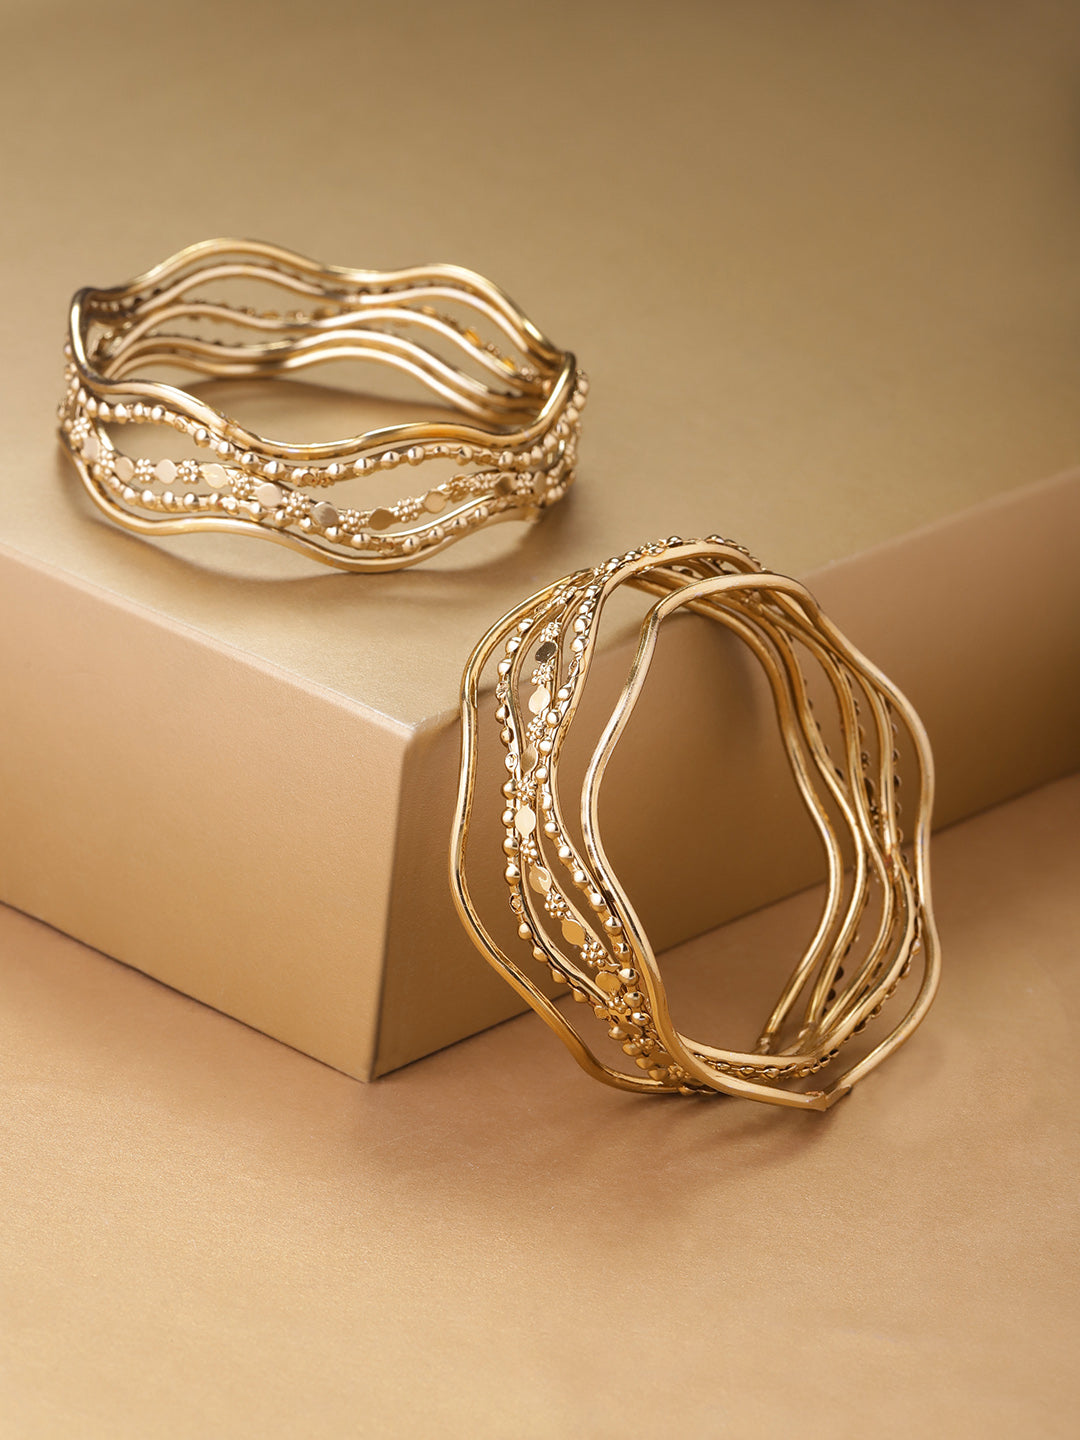 Set Of 10 Gold-Plated Curved Shape Bangles